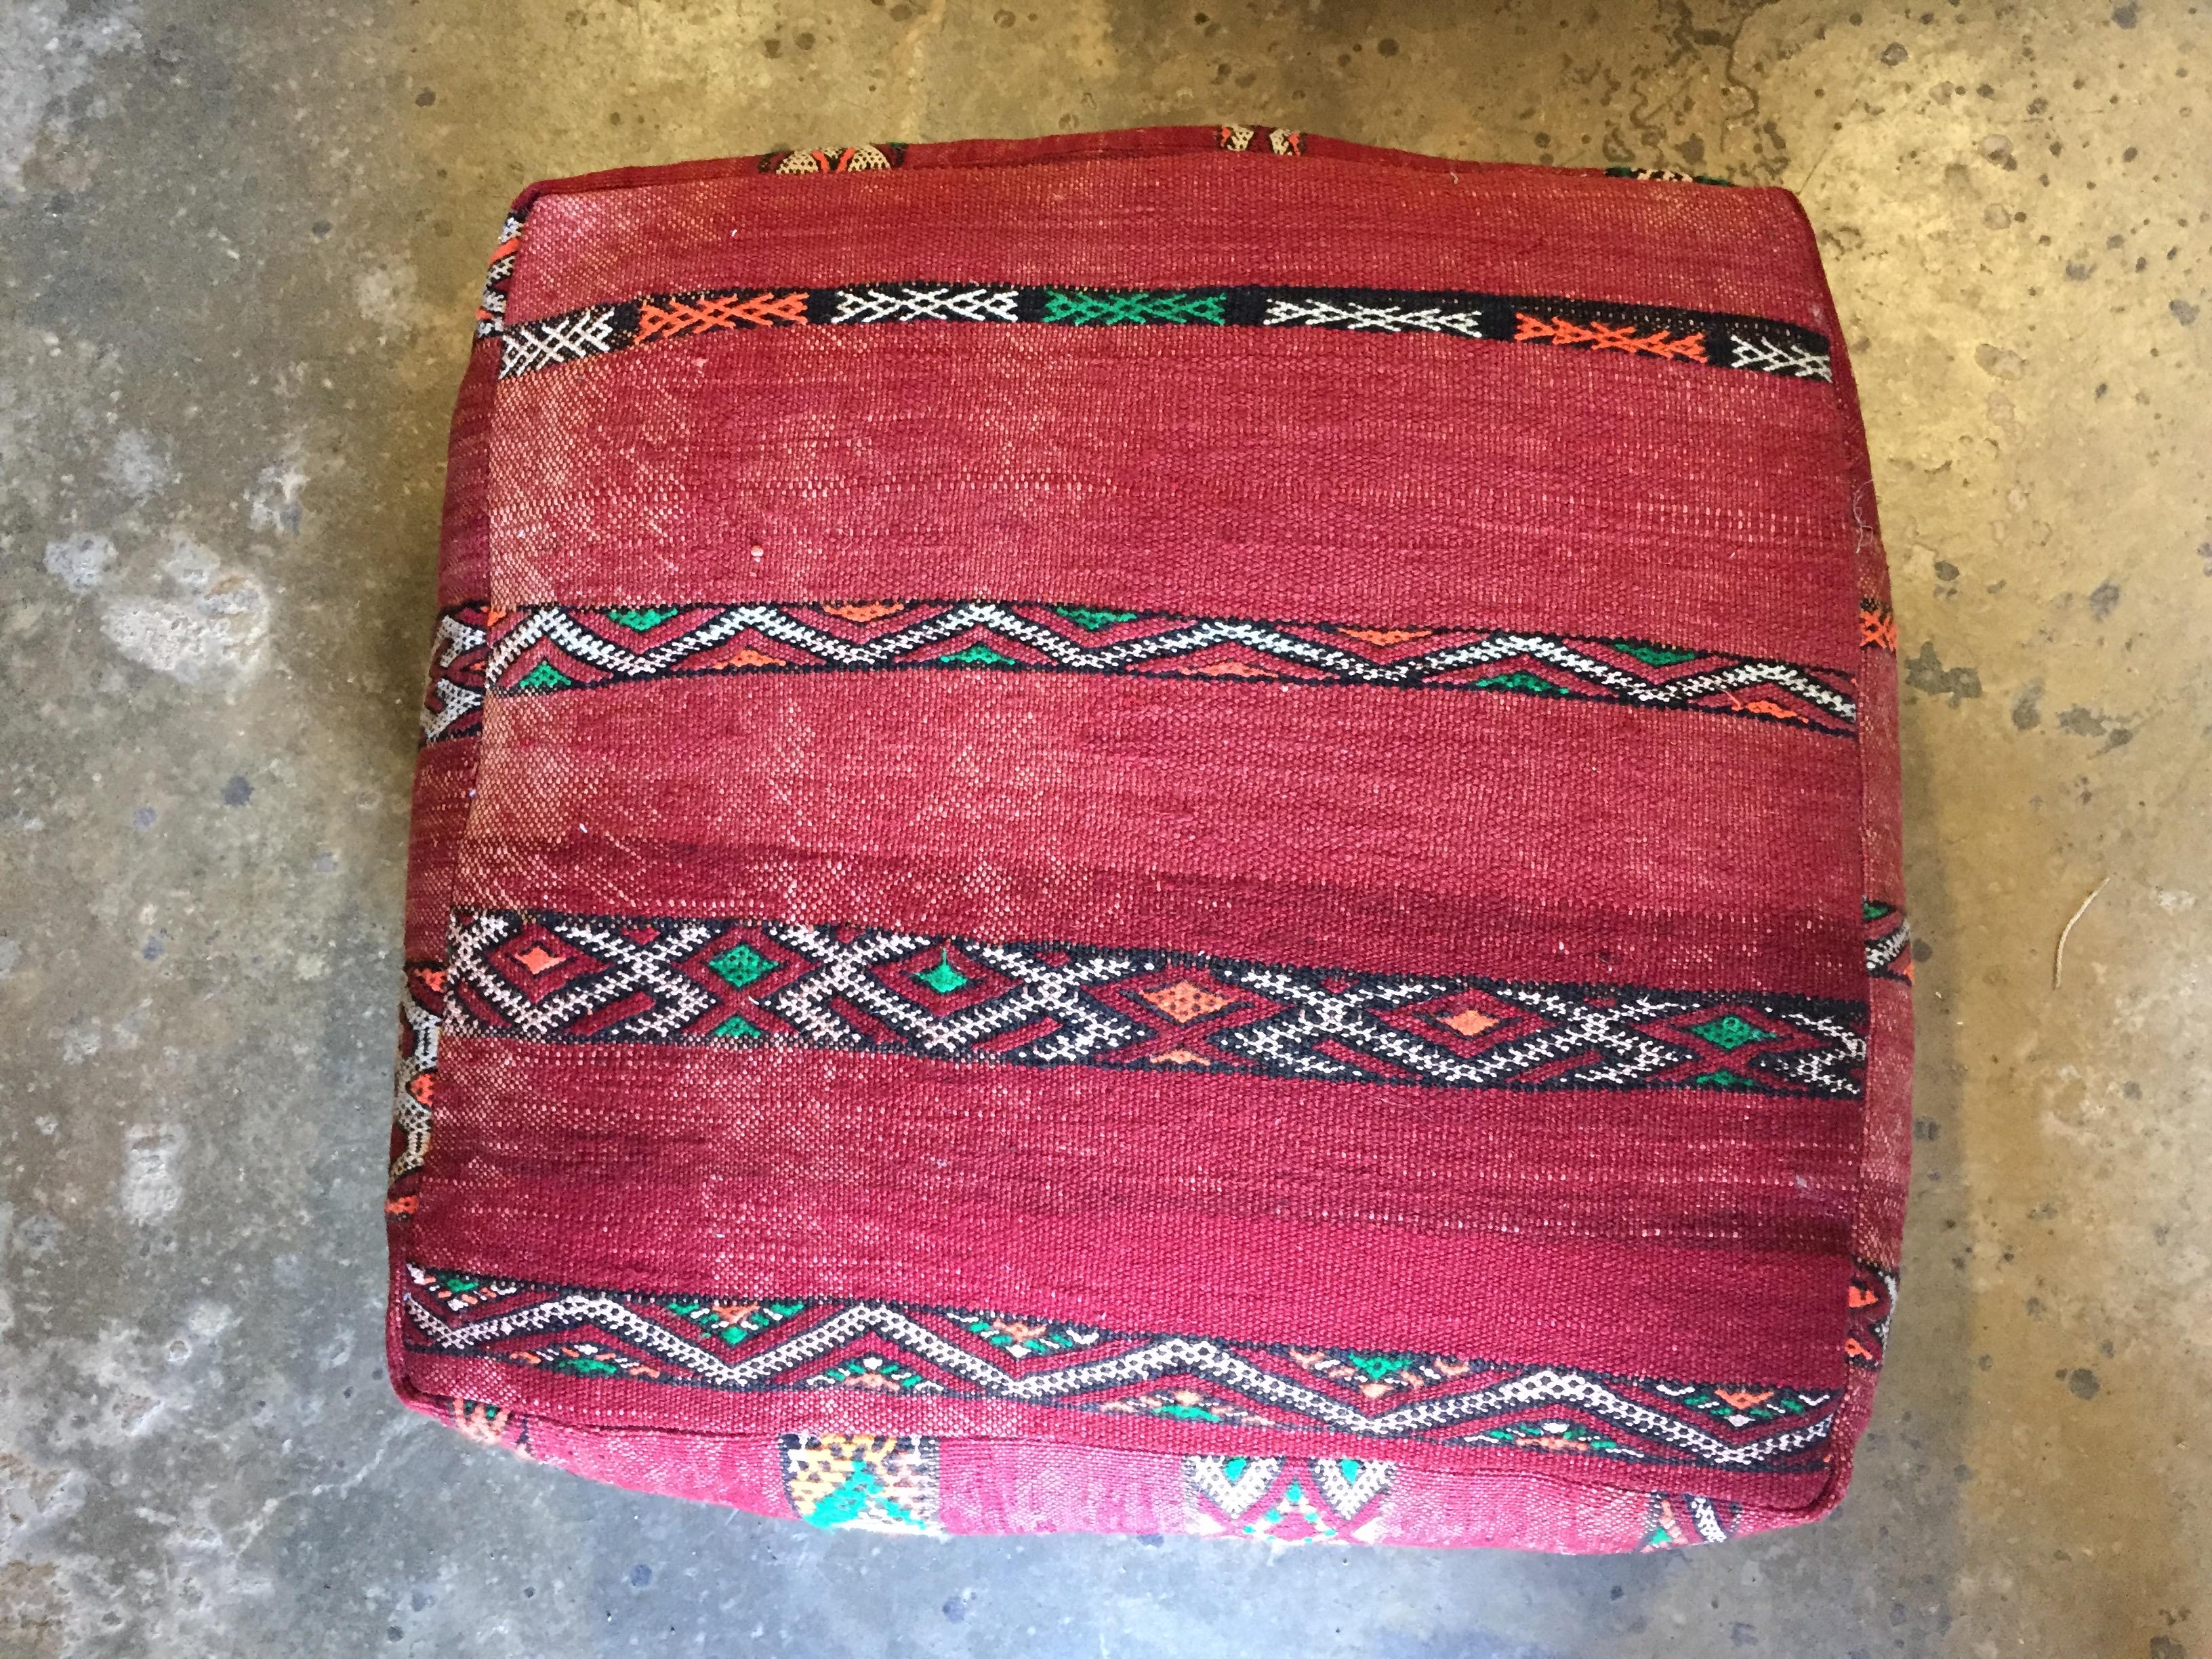 Moroccan vintage floor pillow seat cushion made from a Tribal Berber rug.
Square shape with nice faded earth tone colors for the top and rich warm stripes colors for the bottom.
Great addition for any Bohemian or Modern interior.
Made from a